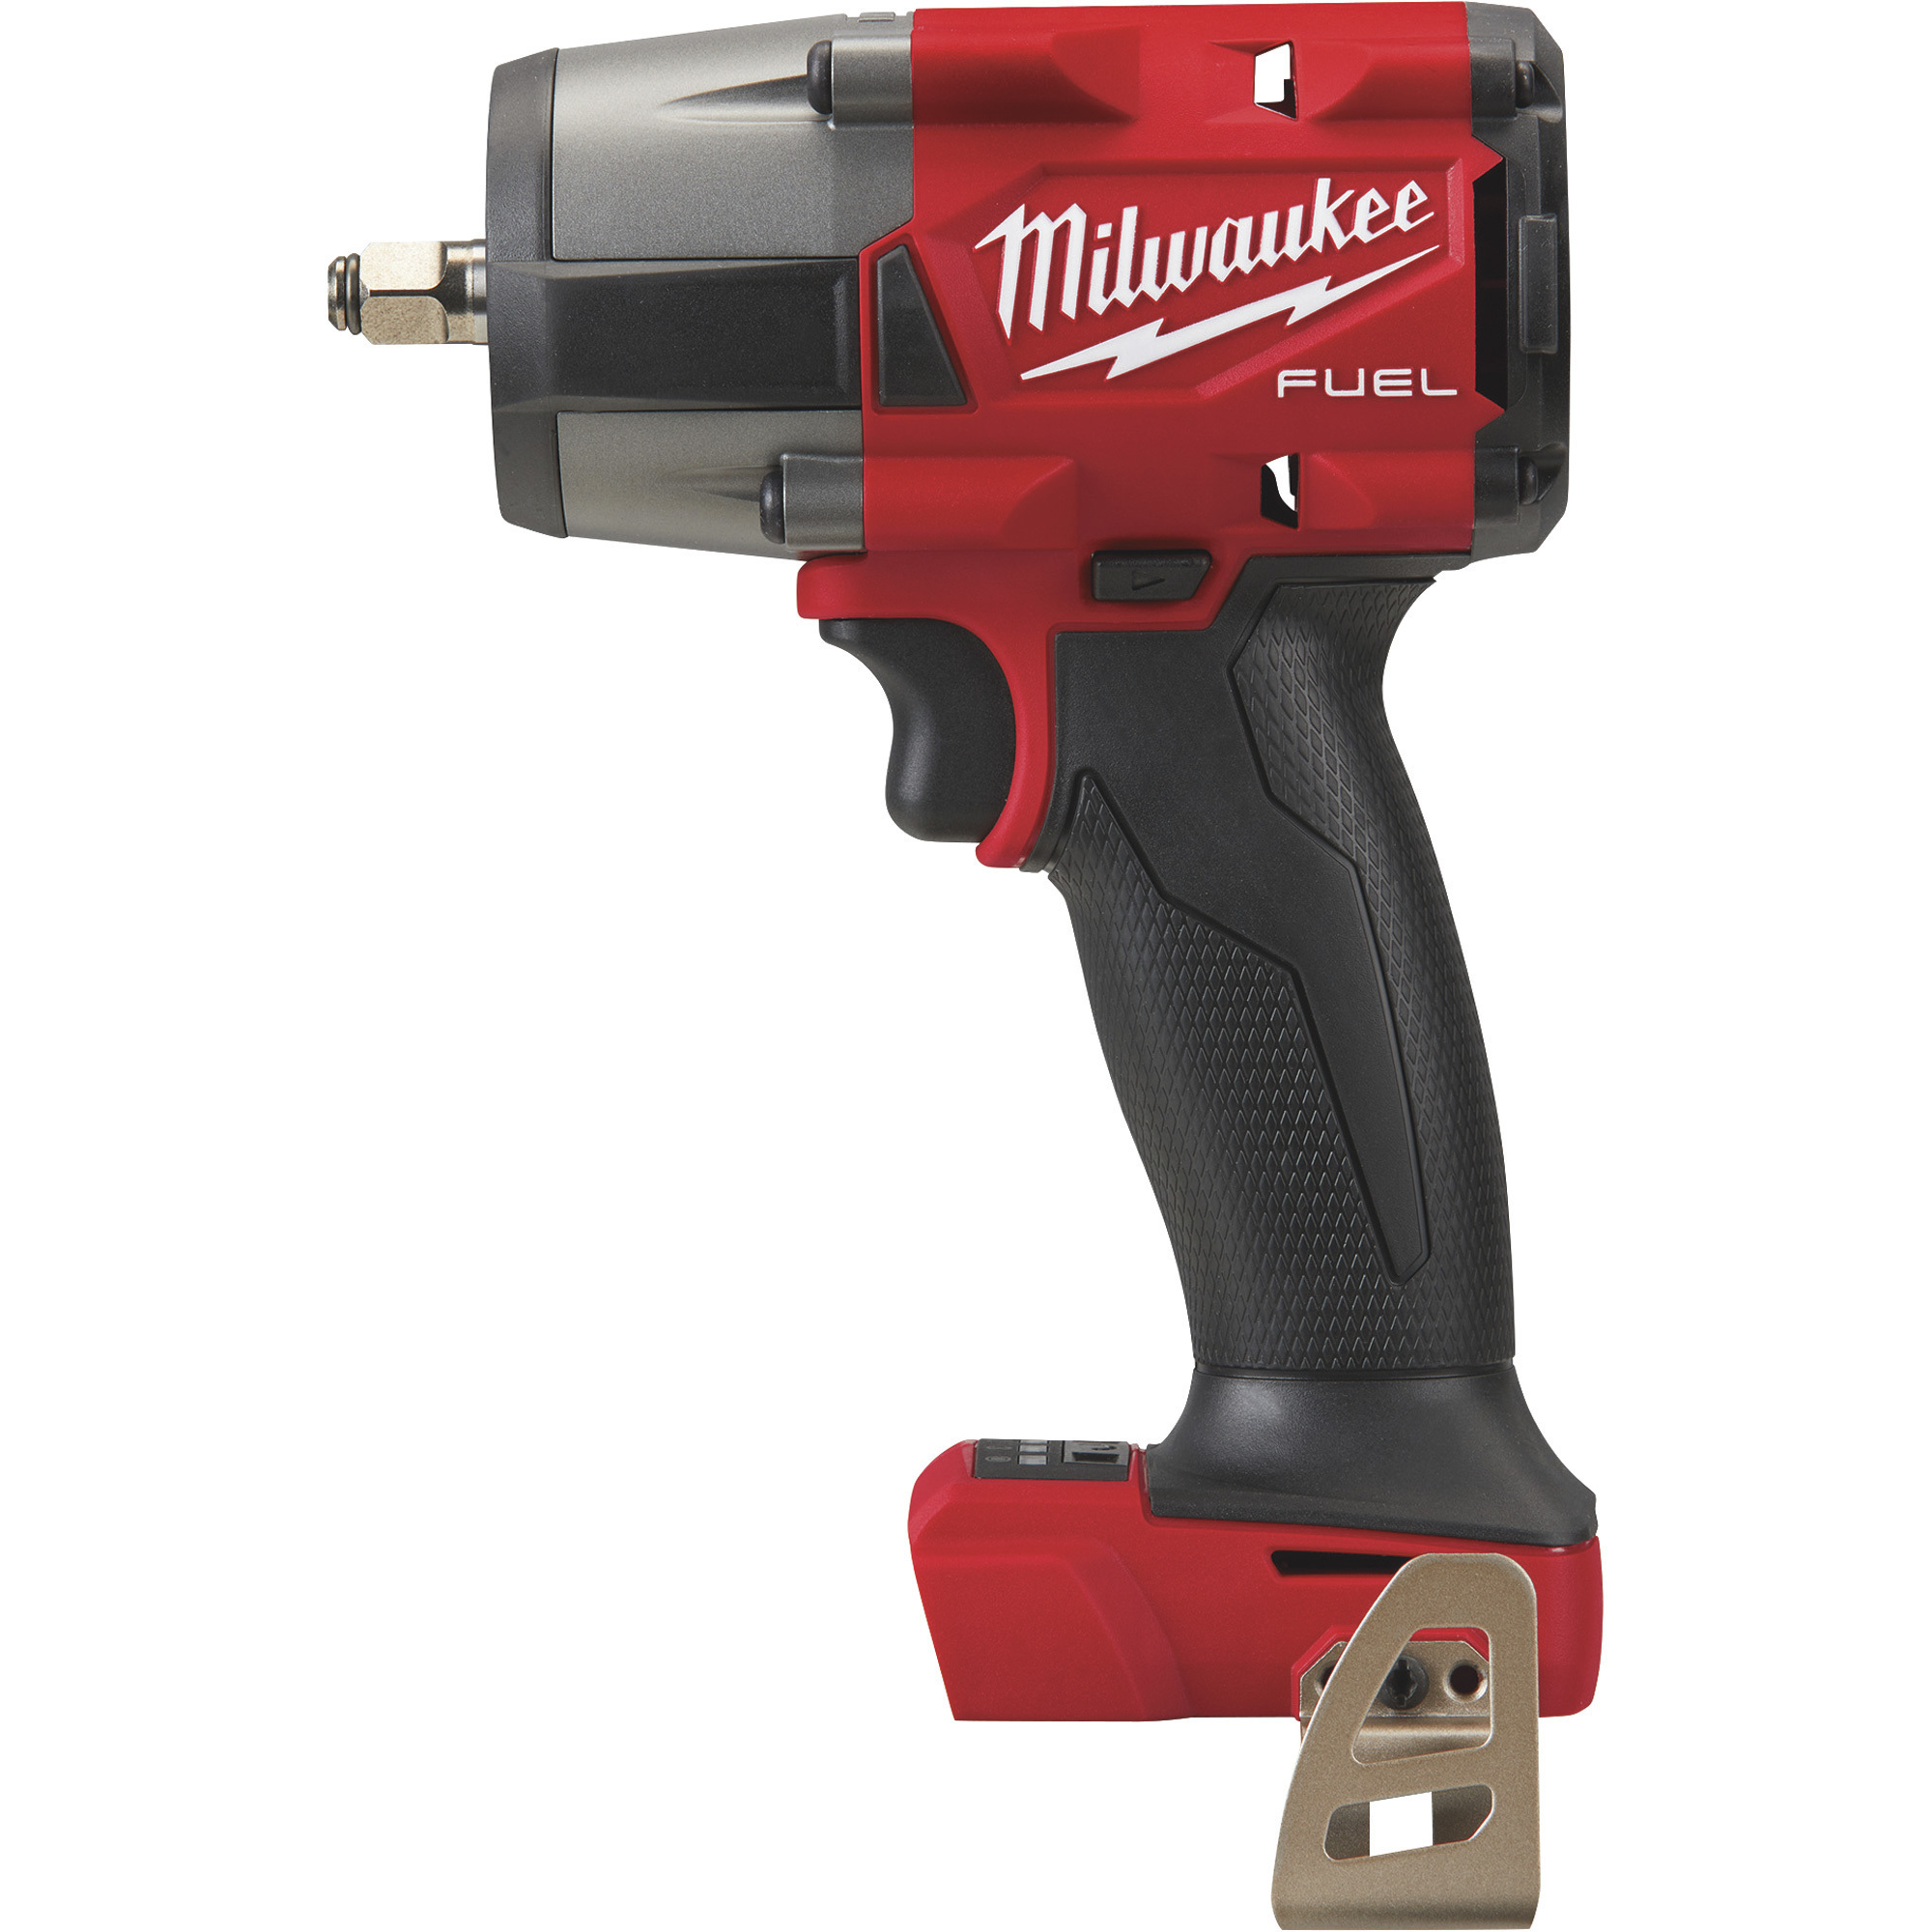 Milwaukee M18 FUEL Mid-Torque Impact Wrench with Friction Ring, Tool Only,  3/8in. Drive, 600 Ft./Lbs. Torque, Model# 2960-20